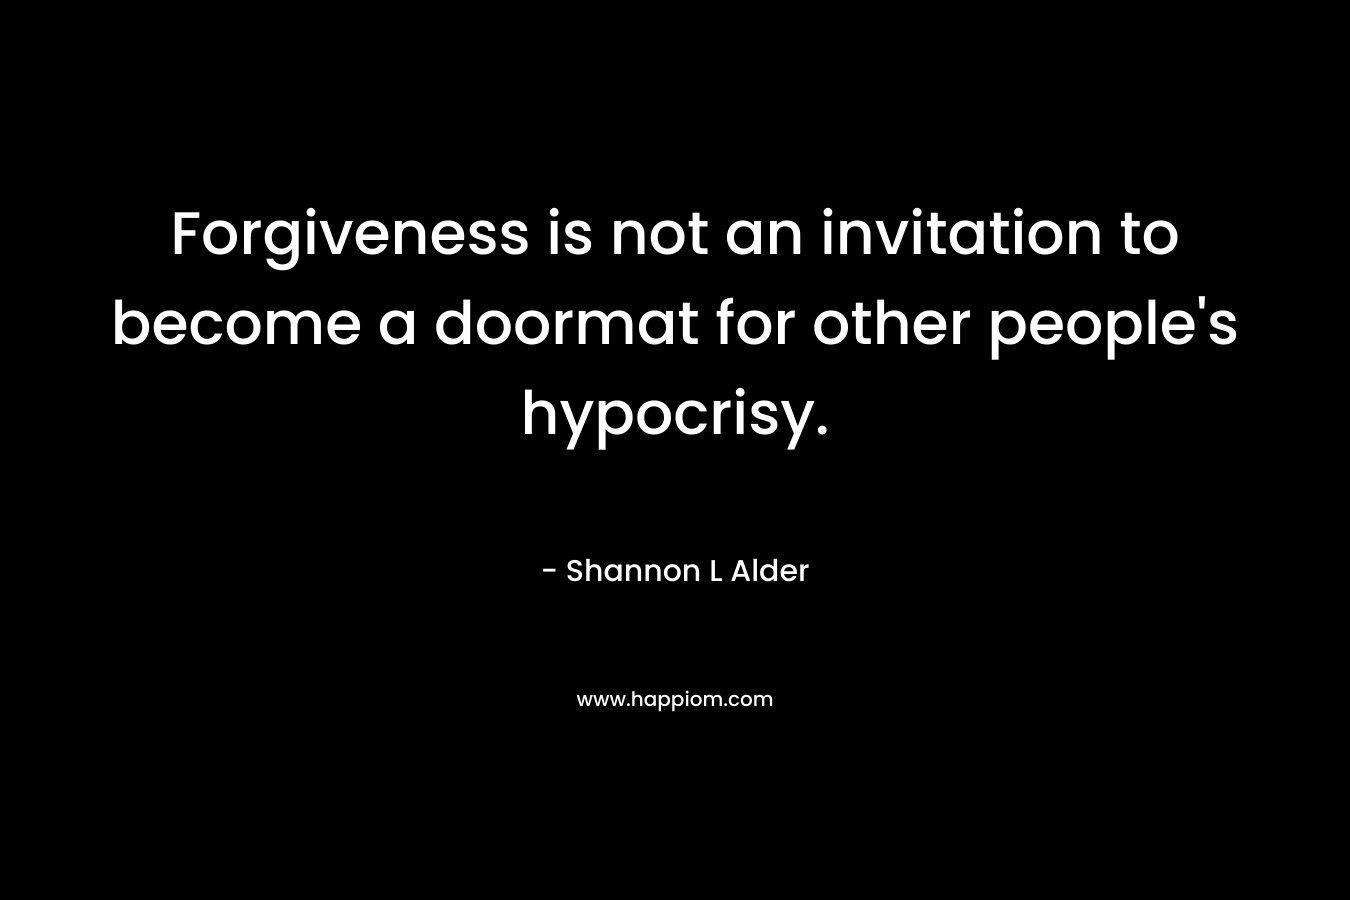 Forgiveness is not an invitation to become a doormat for other people’s hypocrisy. – Shannon L Alder